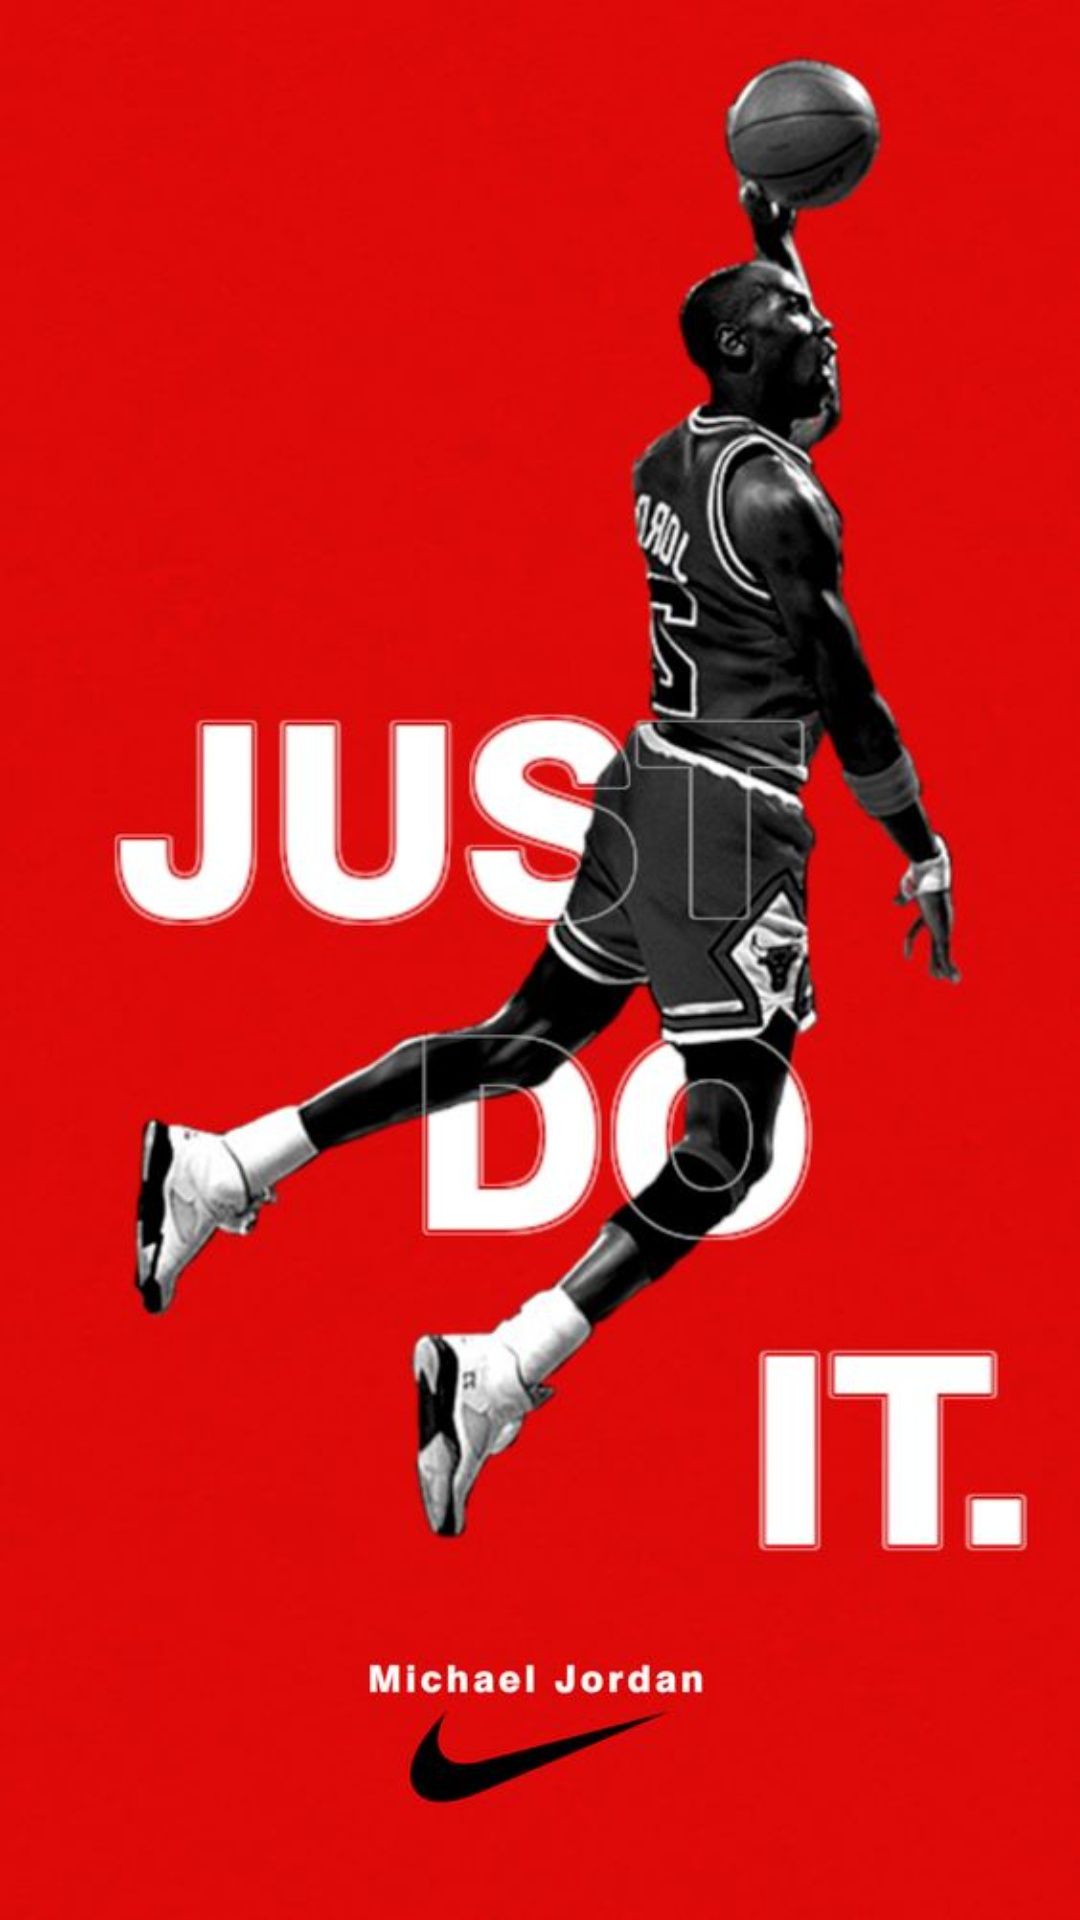 IPhone Wallpaper HD Michael Jordan with high-resolution 1080x1920 pixel. You can use this wallpaper for your iPhone 5, 6, 7, 8, X, XS, XR backgrounds, Mobile Screensaver, or iPad Lock Screen - Michael Jordan